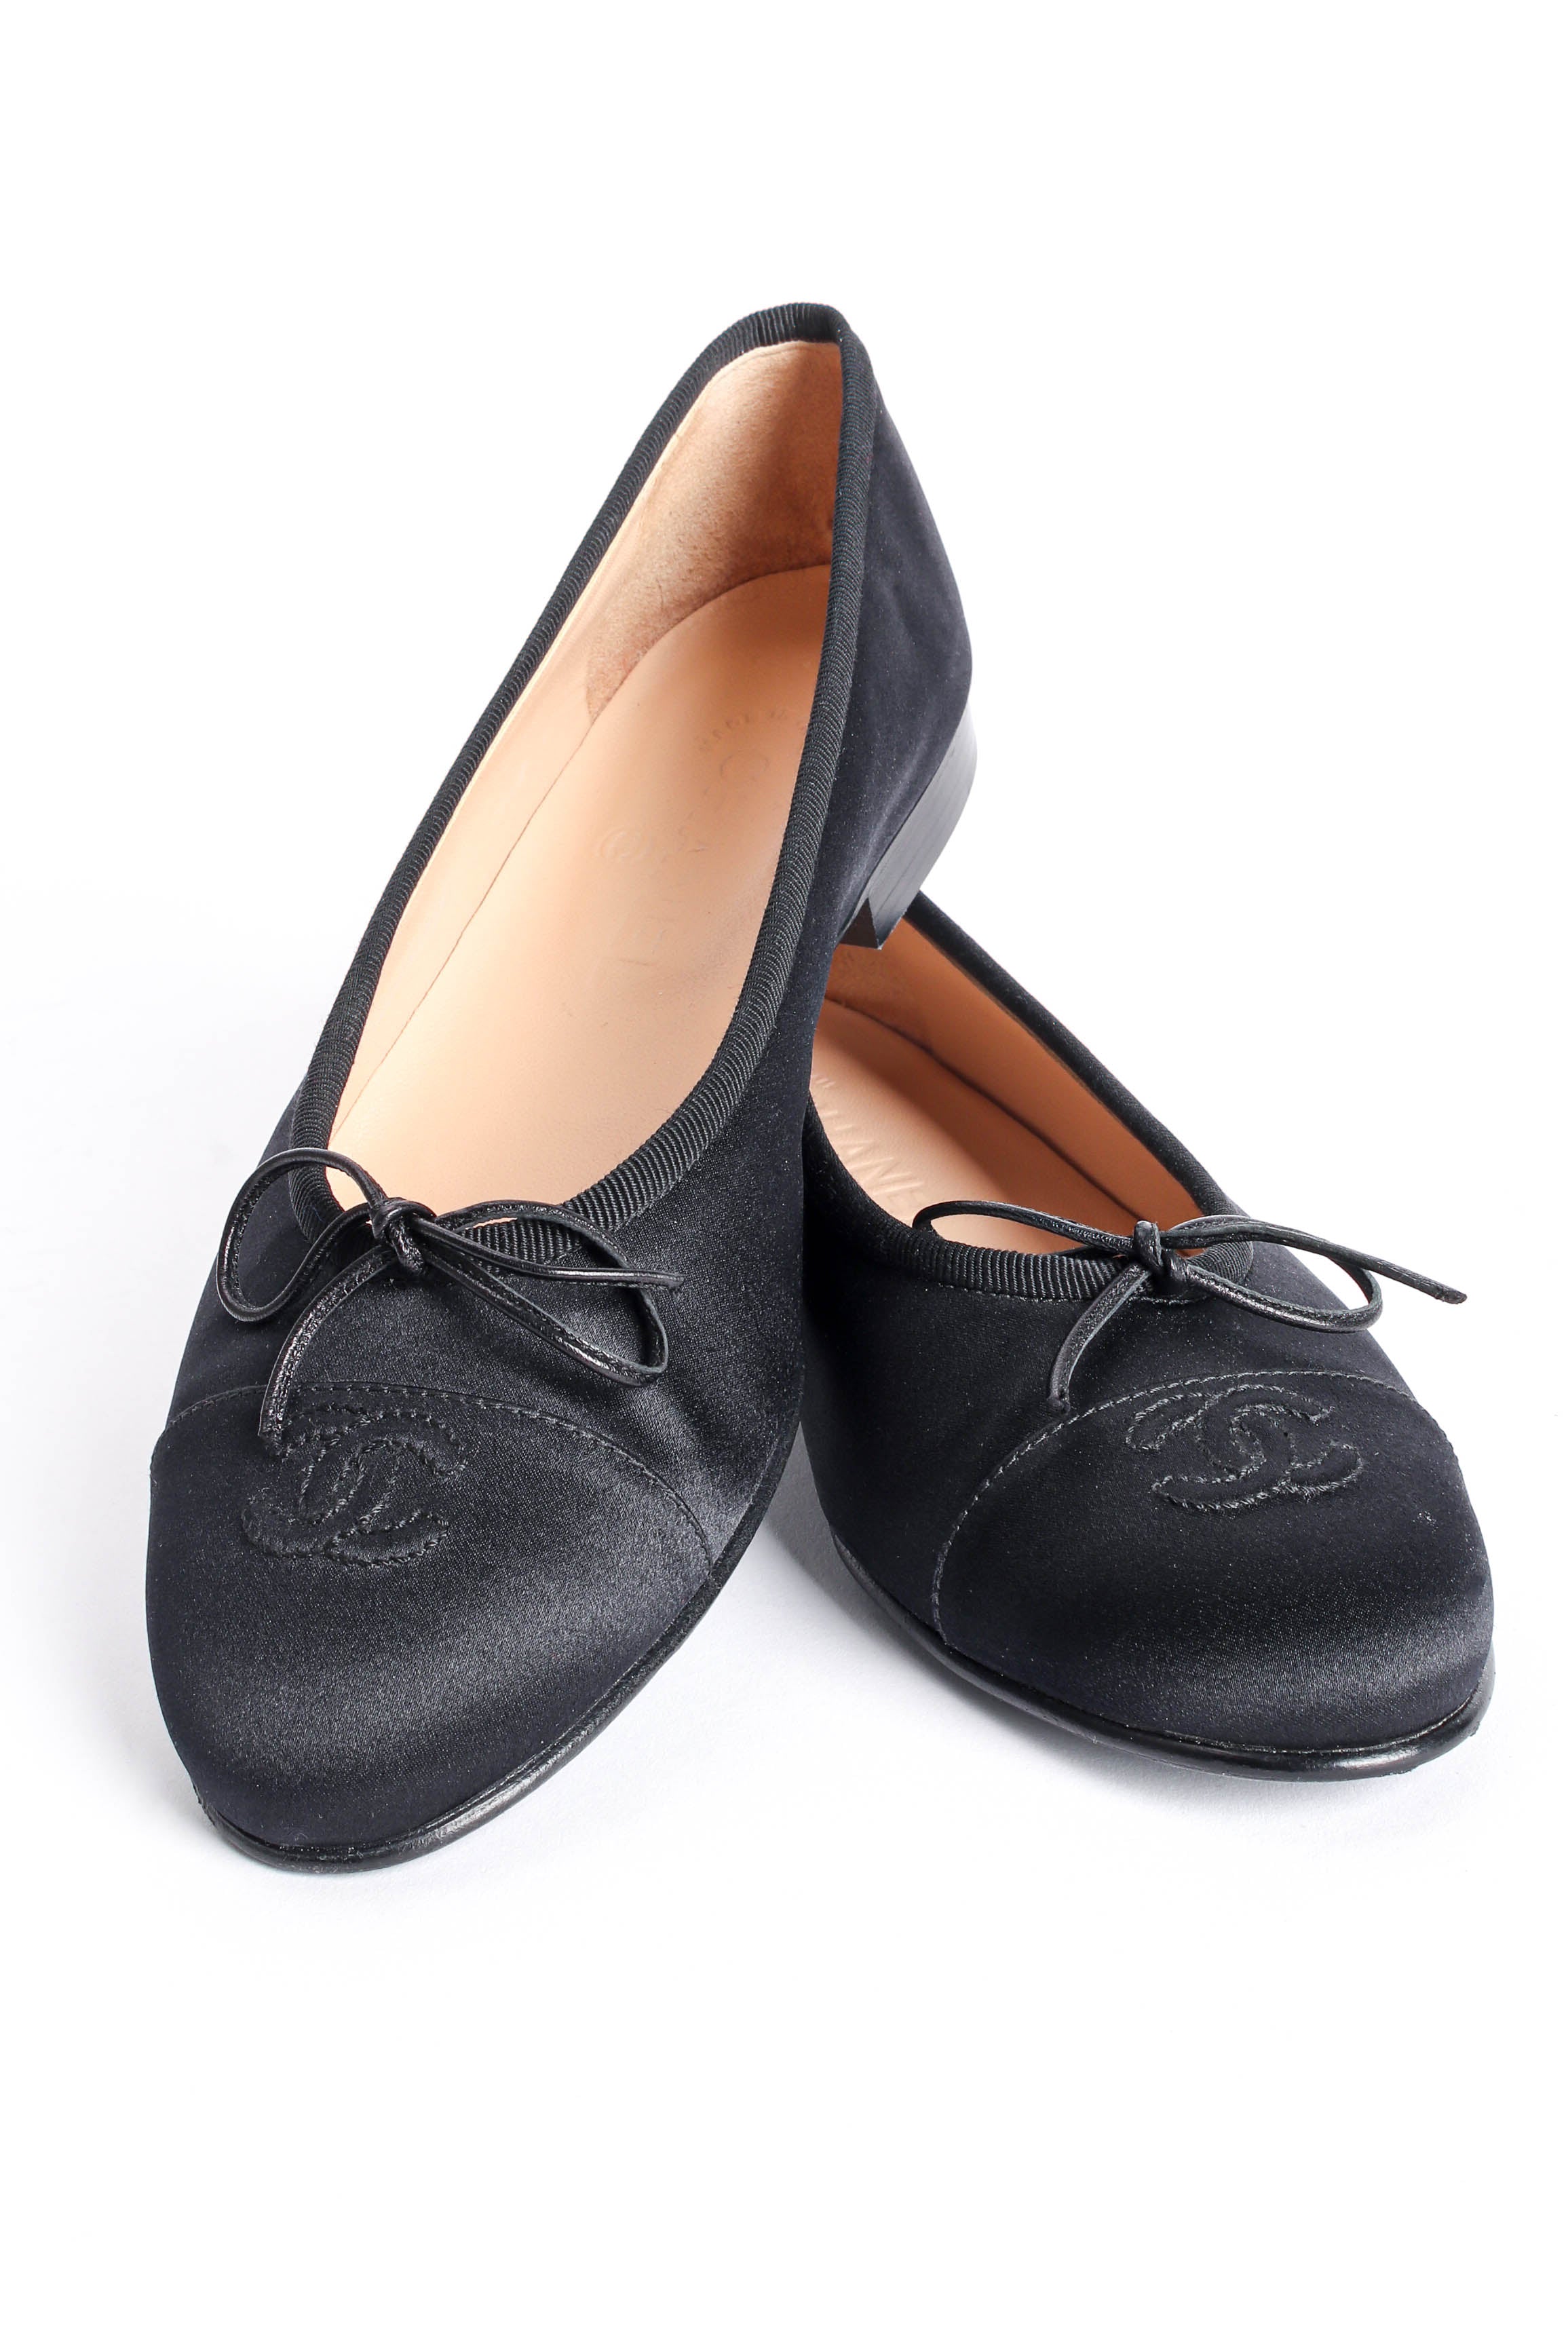 Chanel Ballerina Shoes - 25 For Sale on 1stDibs  chanel ballerinas price, chanel  flat shoes, chanel ballerina flats